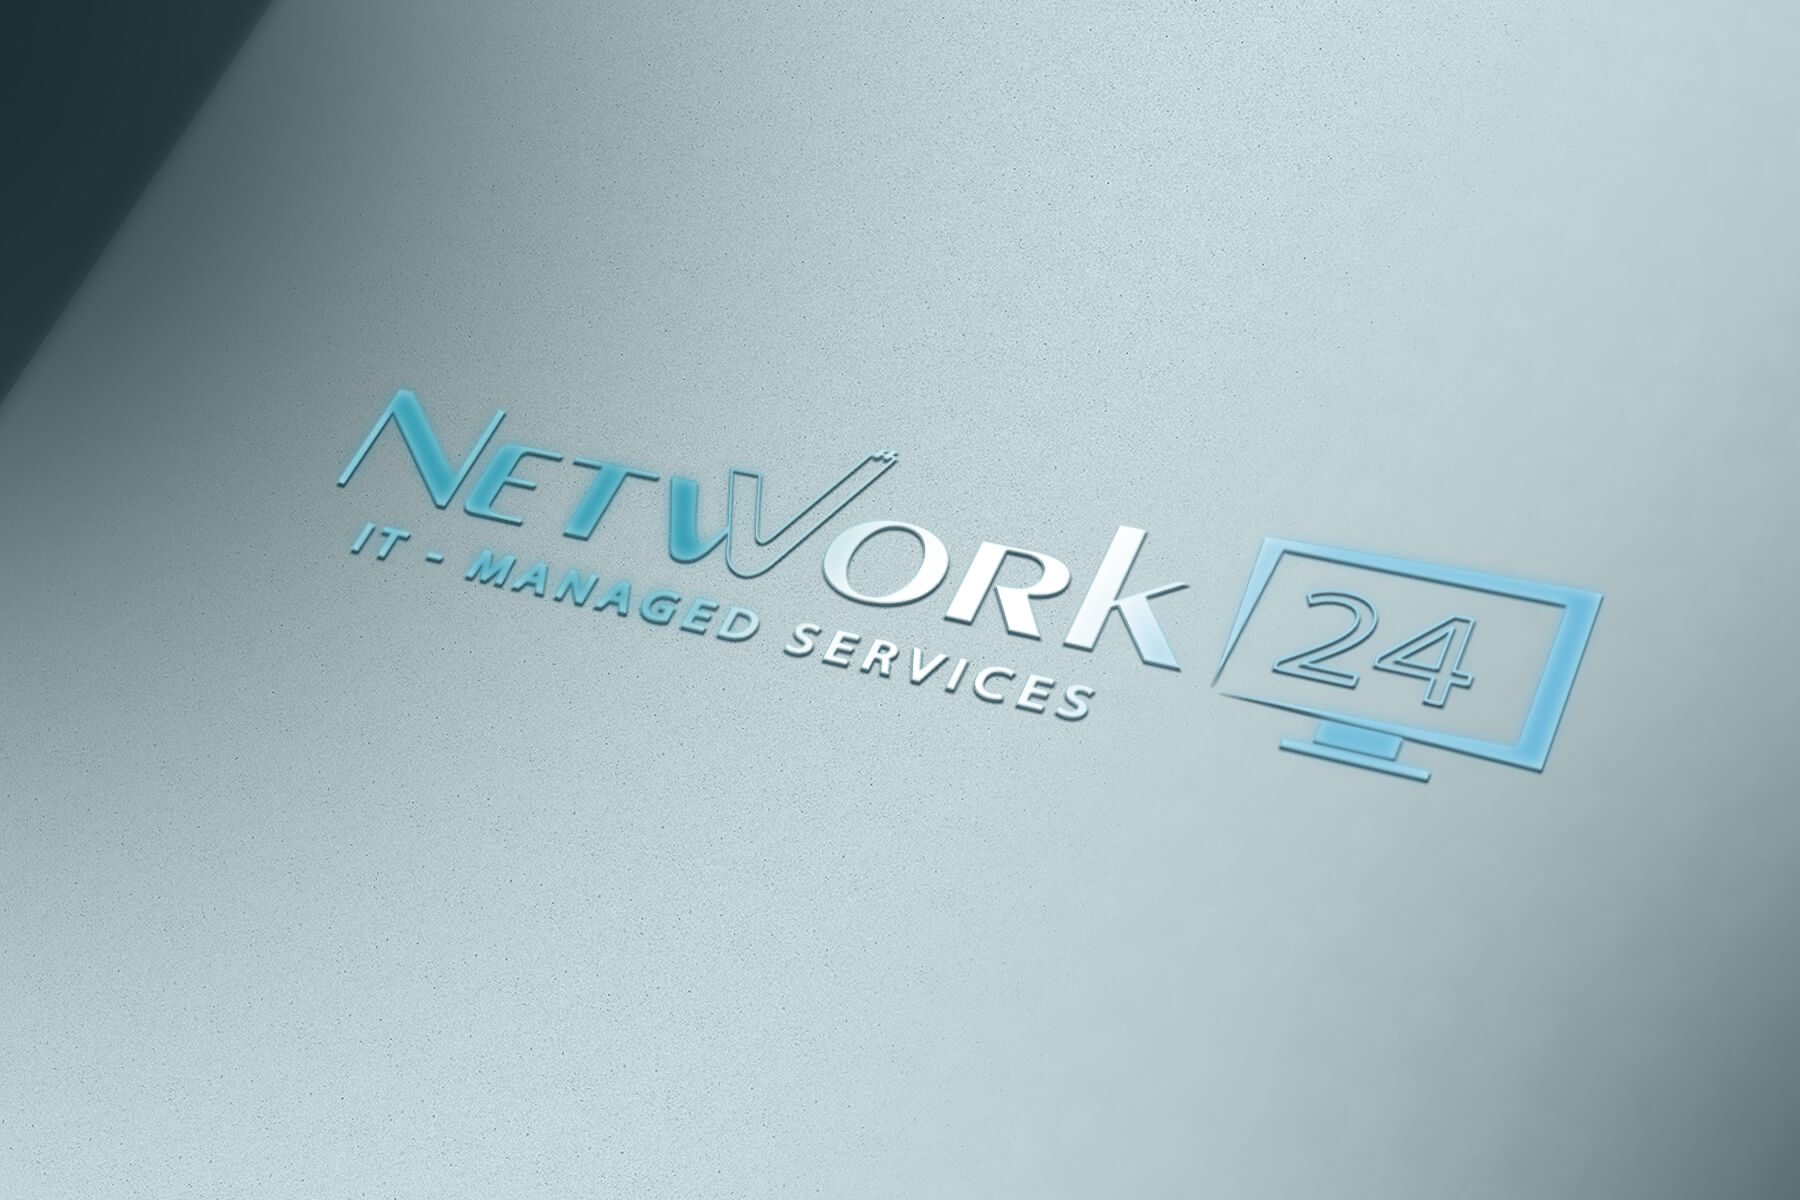 Network 24 - Designs by CR8VE designs Perth